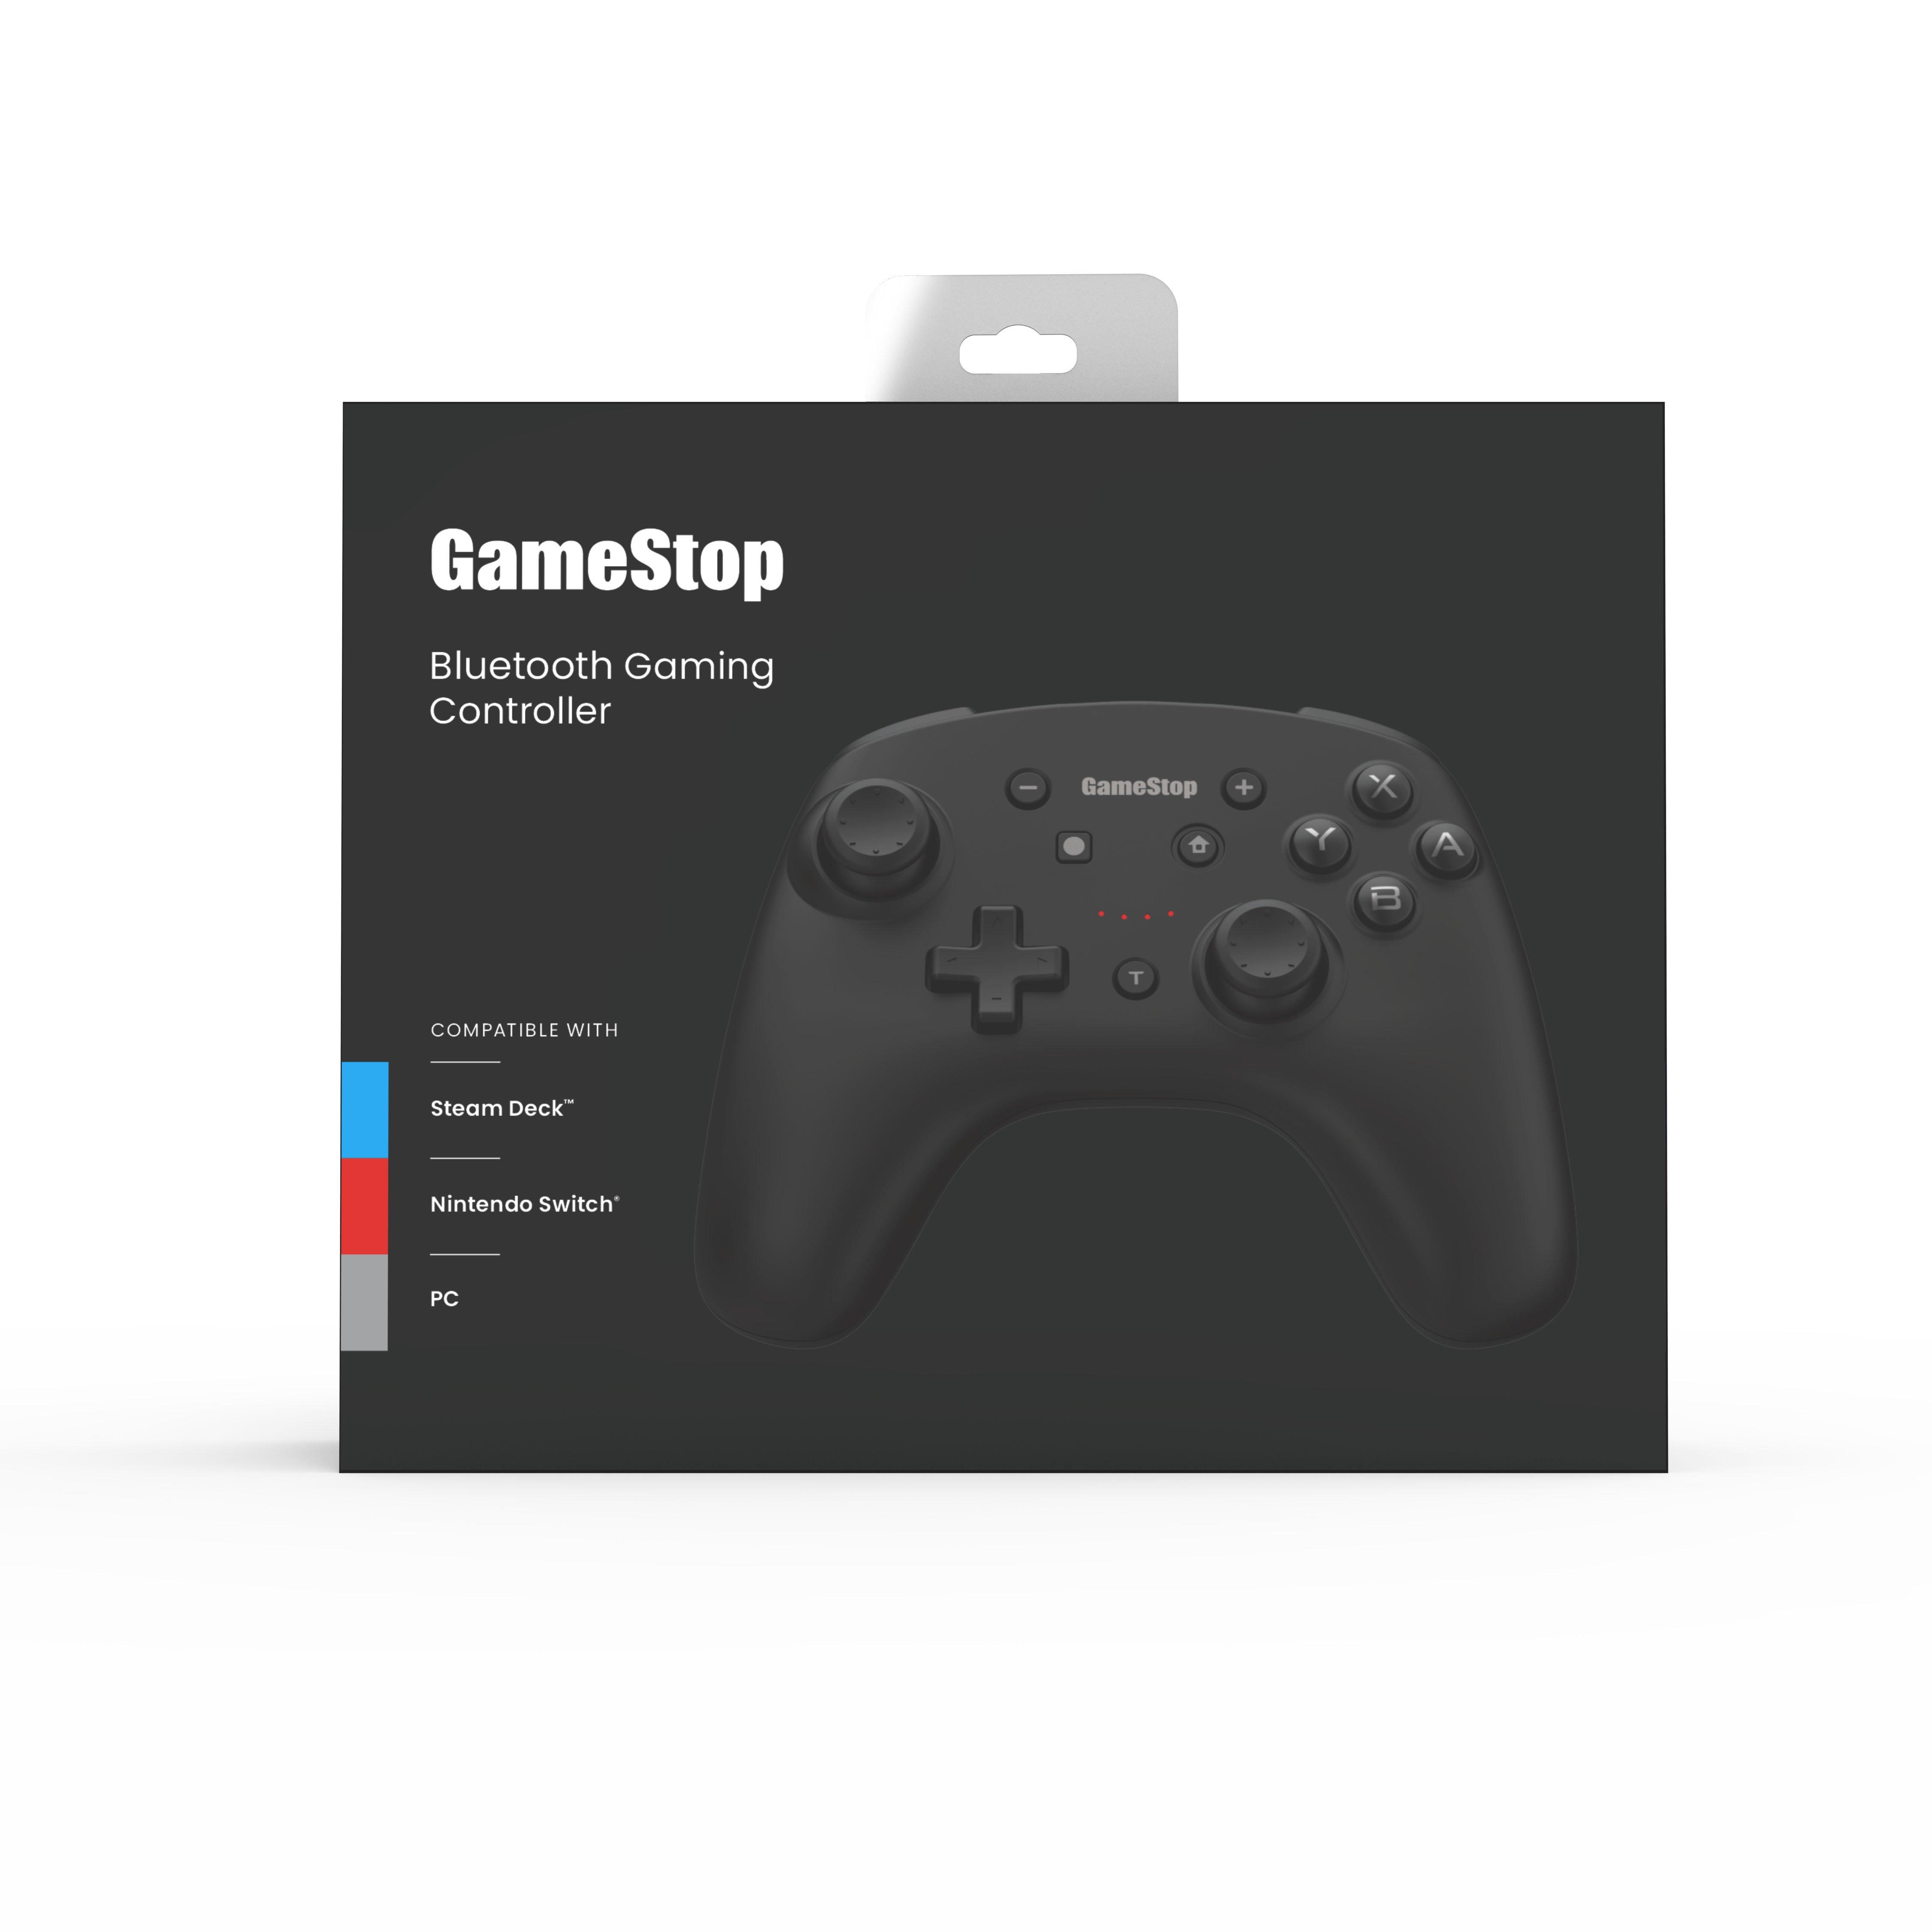 GameStop Wireless Gaming Controller for Nintendo Switch, PC